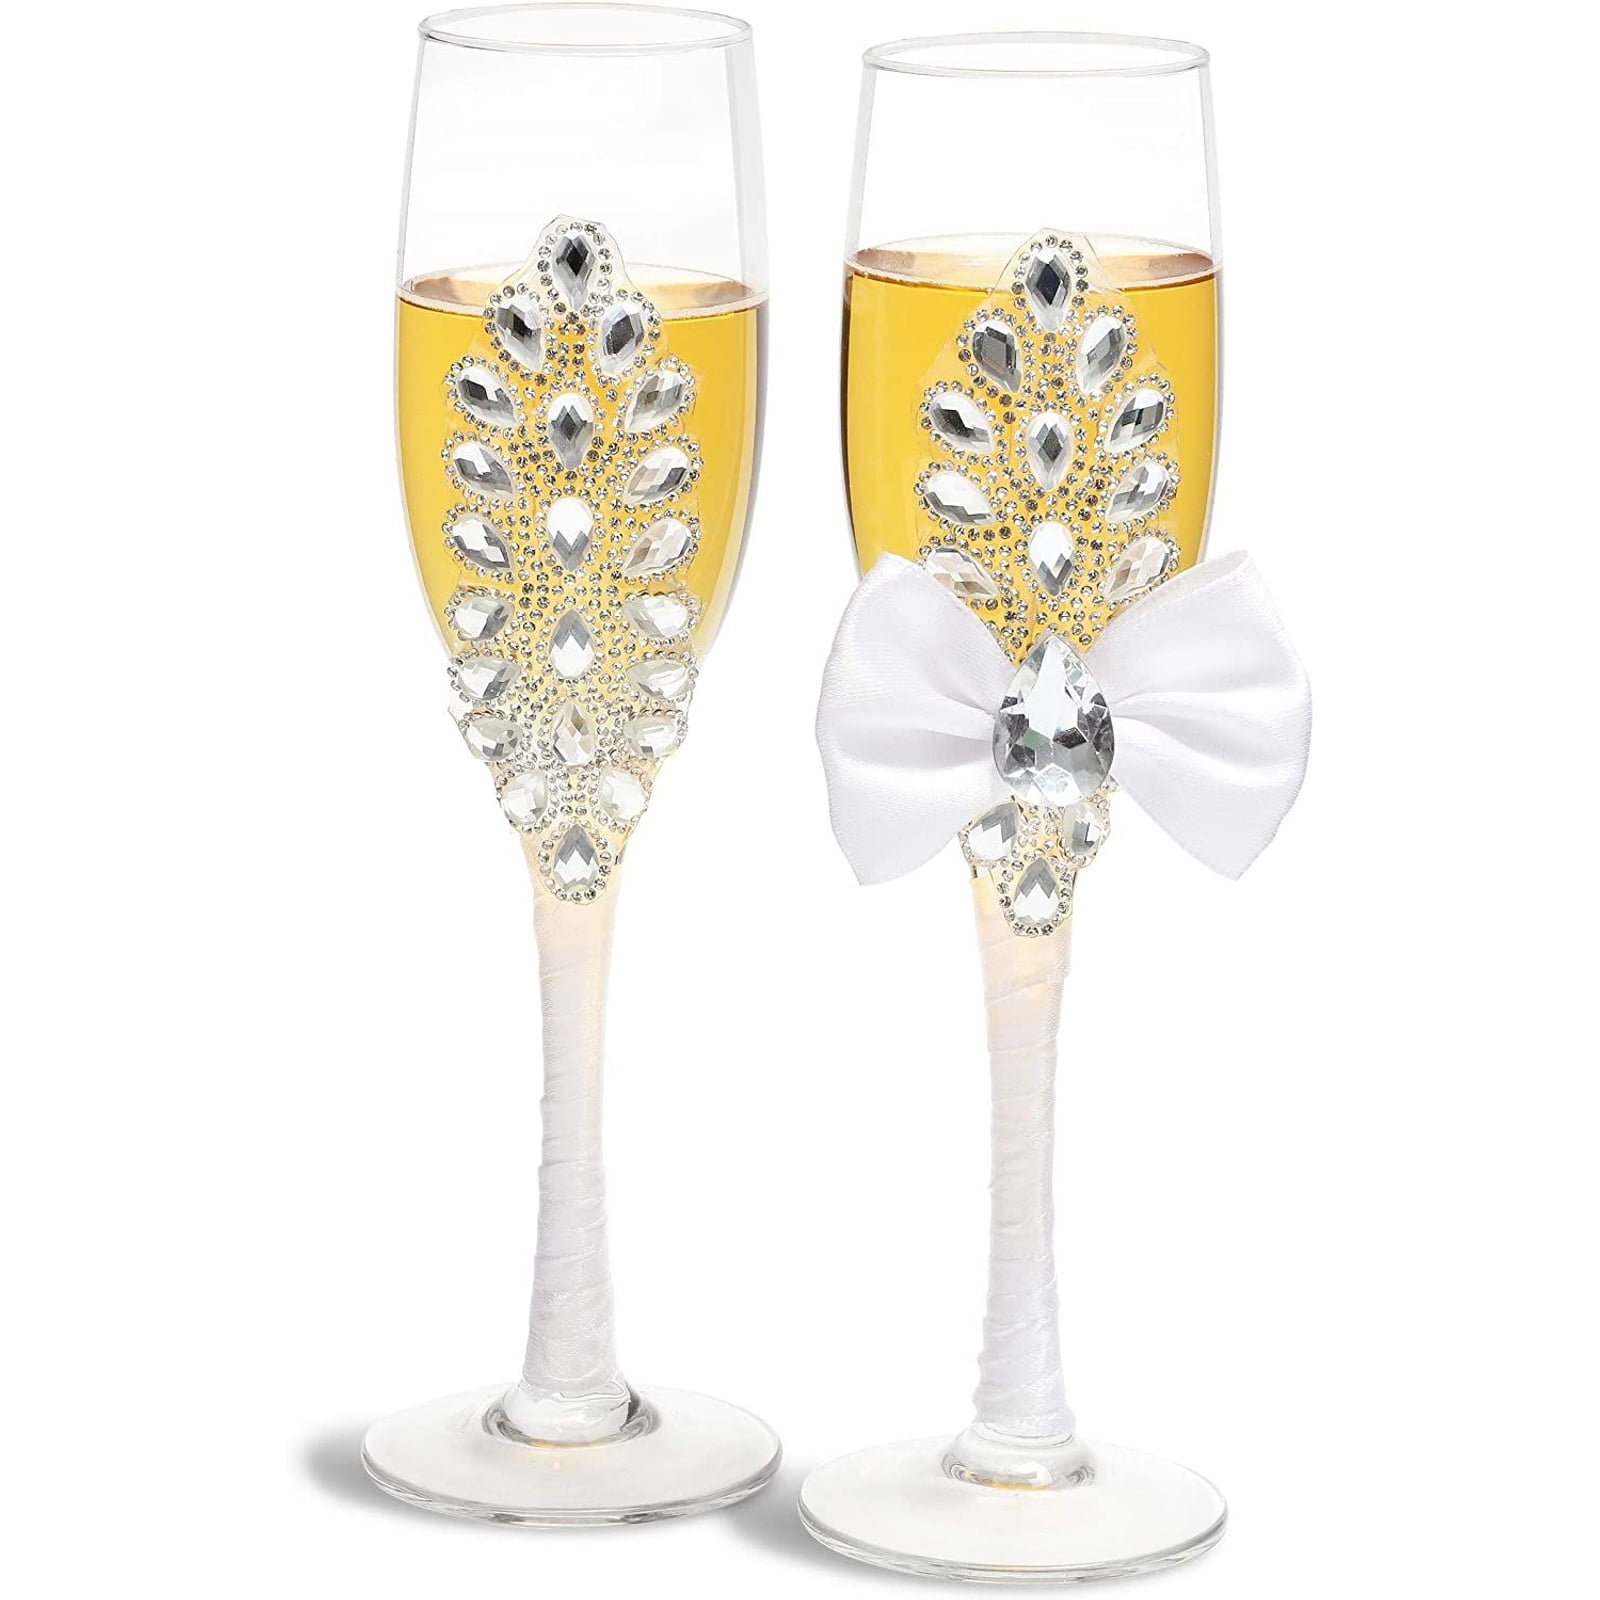 Wedding Day Toasting Bride Groom Champagne Flutes Mr Mrs Silver Glasses Gift 